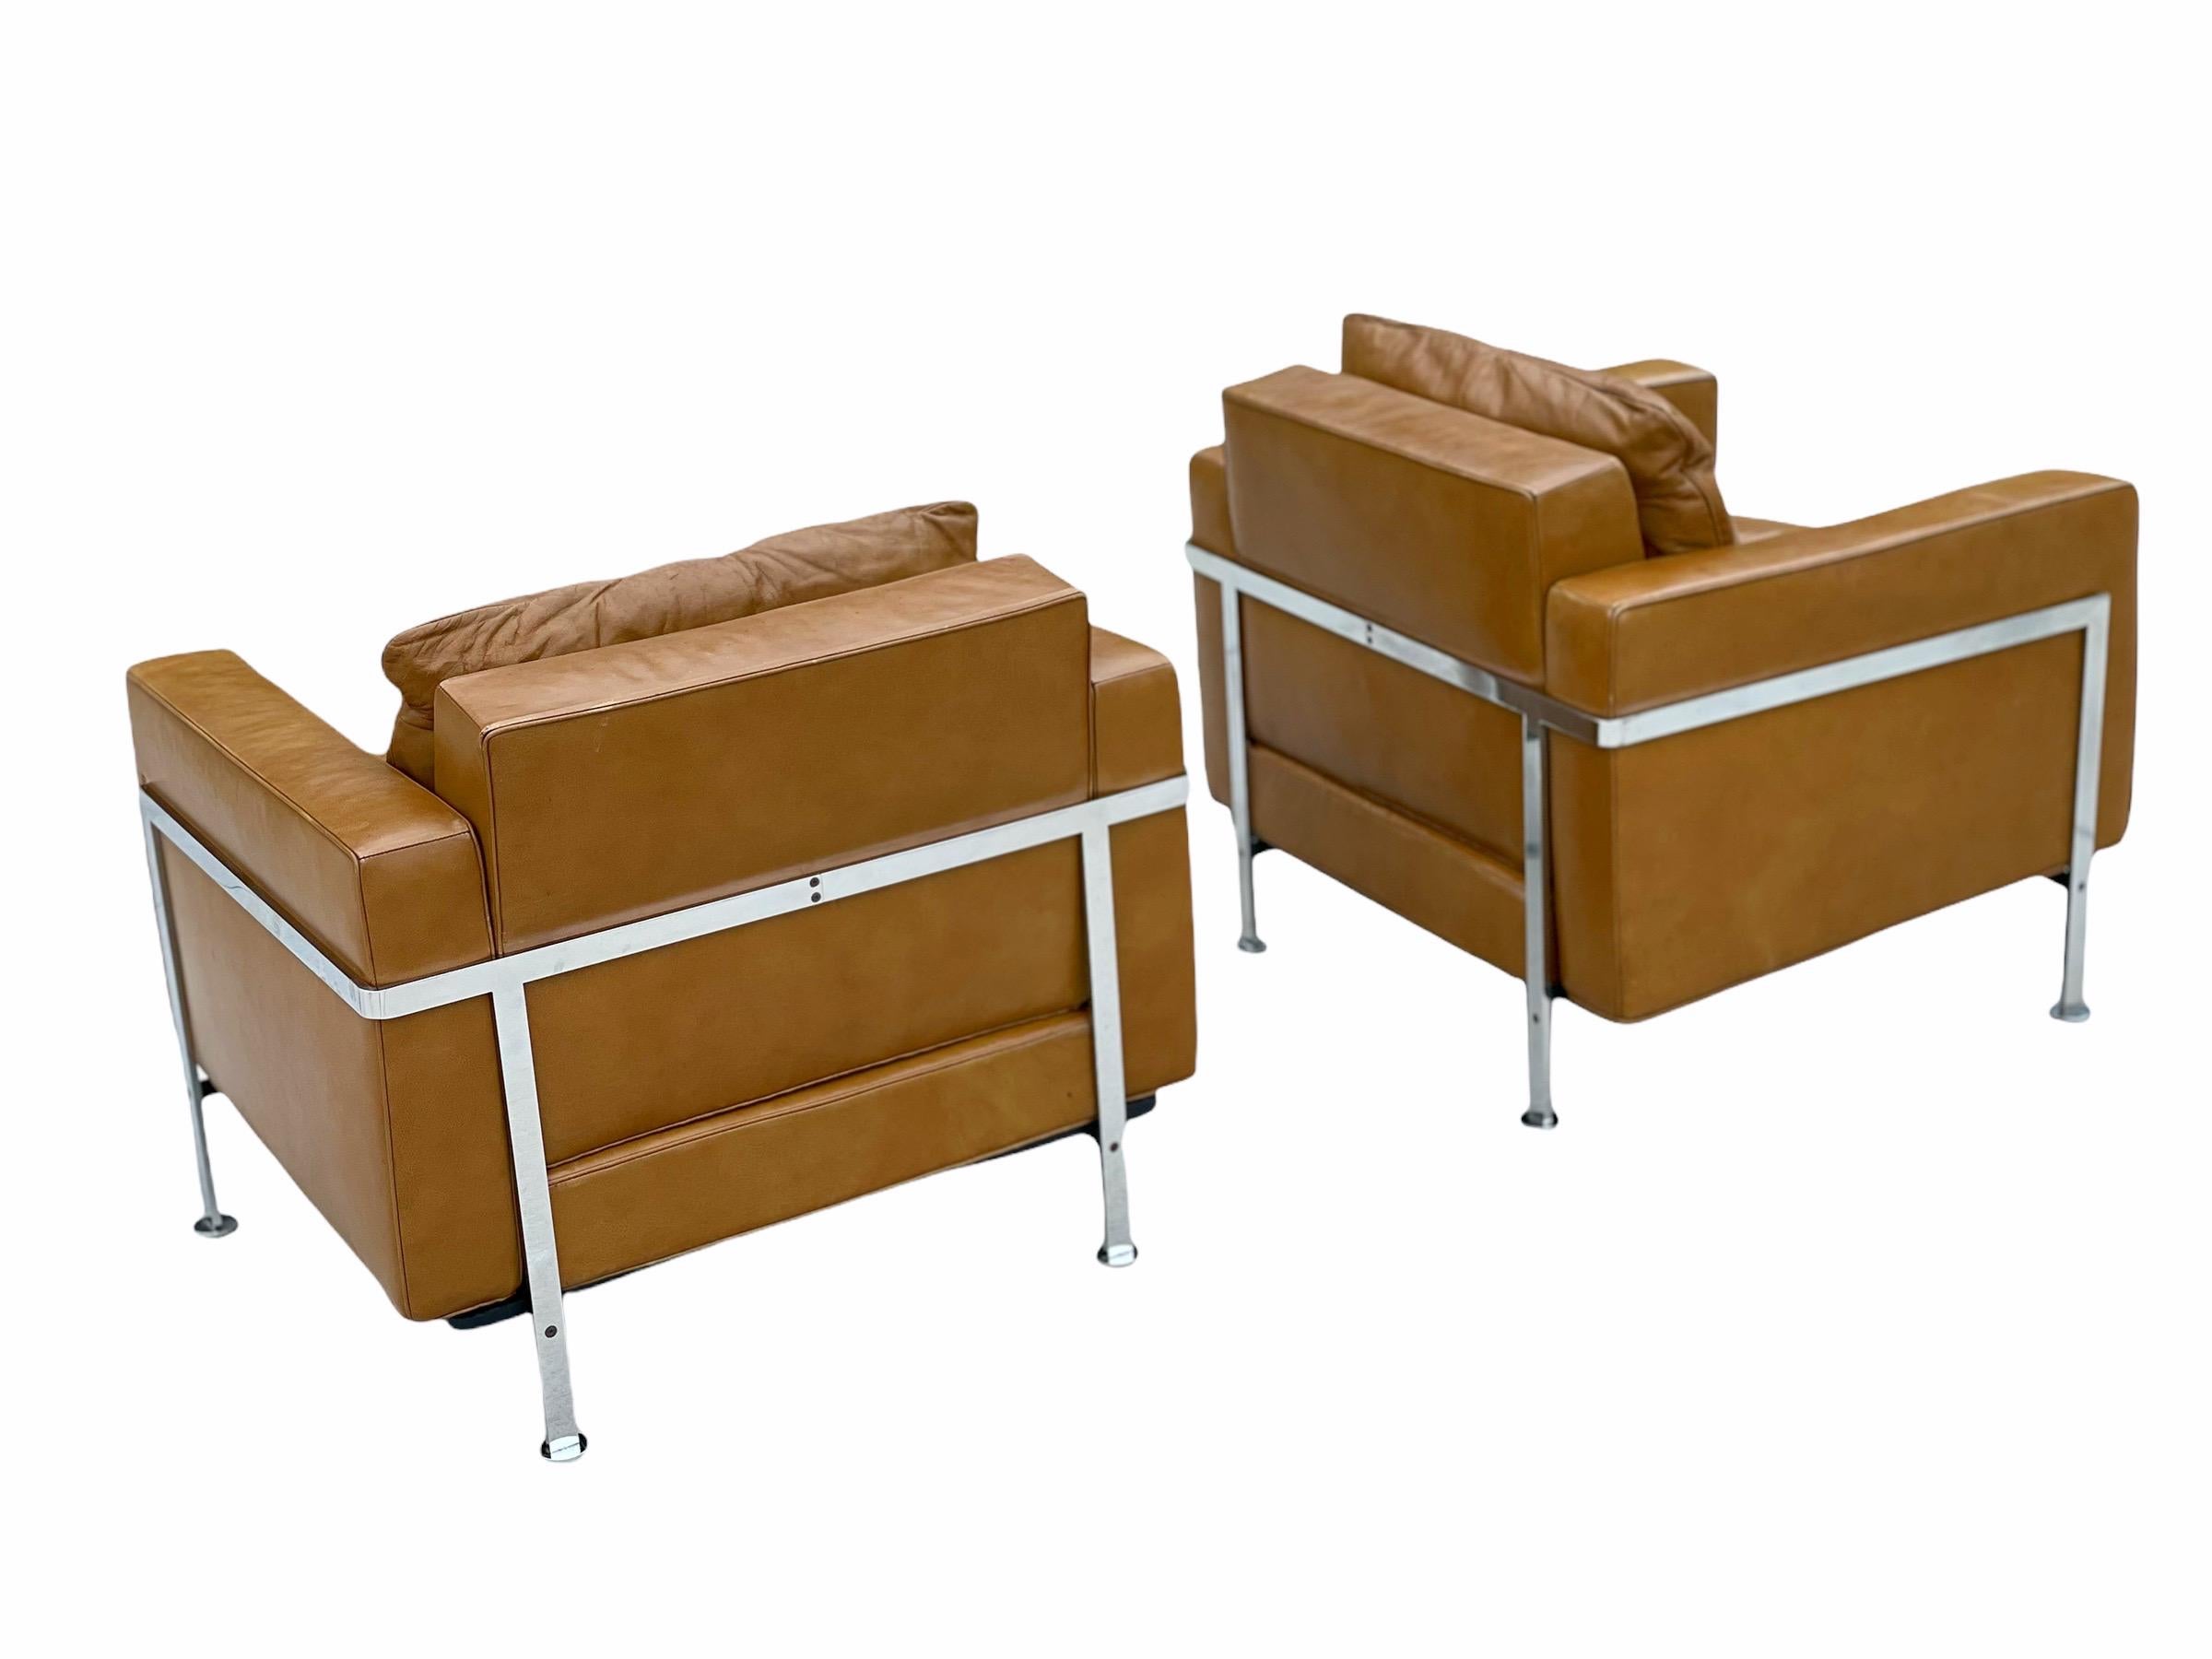 Exquisite pair of model RH302 lounge chairs designed by Robert Haussmann. Built by De Sede in Switzerland and imported to the states by Stendig circa 1960. This model does not surface in the United States often. Chromed steel frames and luscious